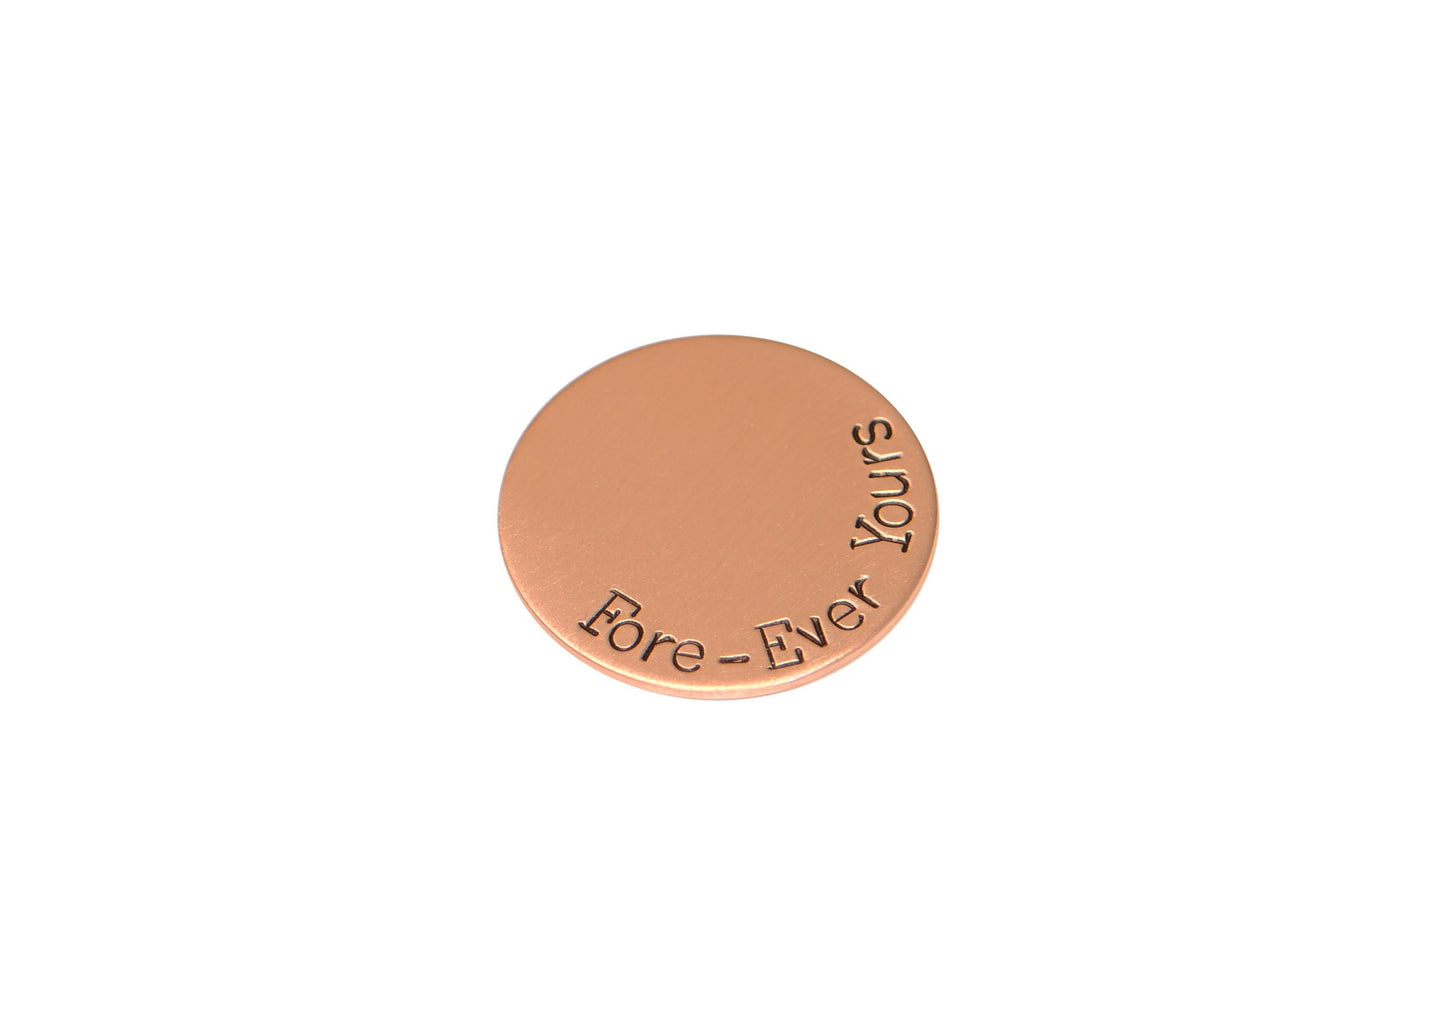 Copper golf ball marker with Fore ever yours